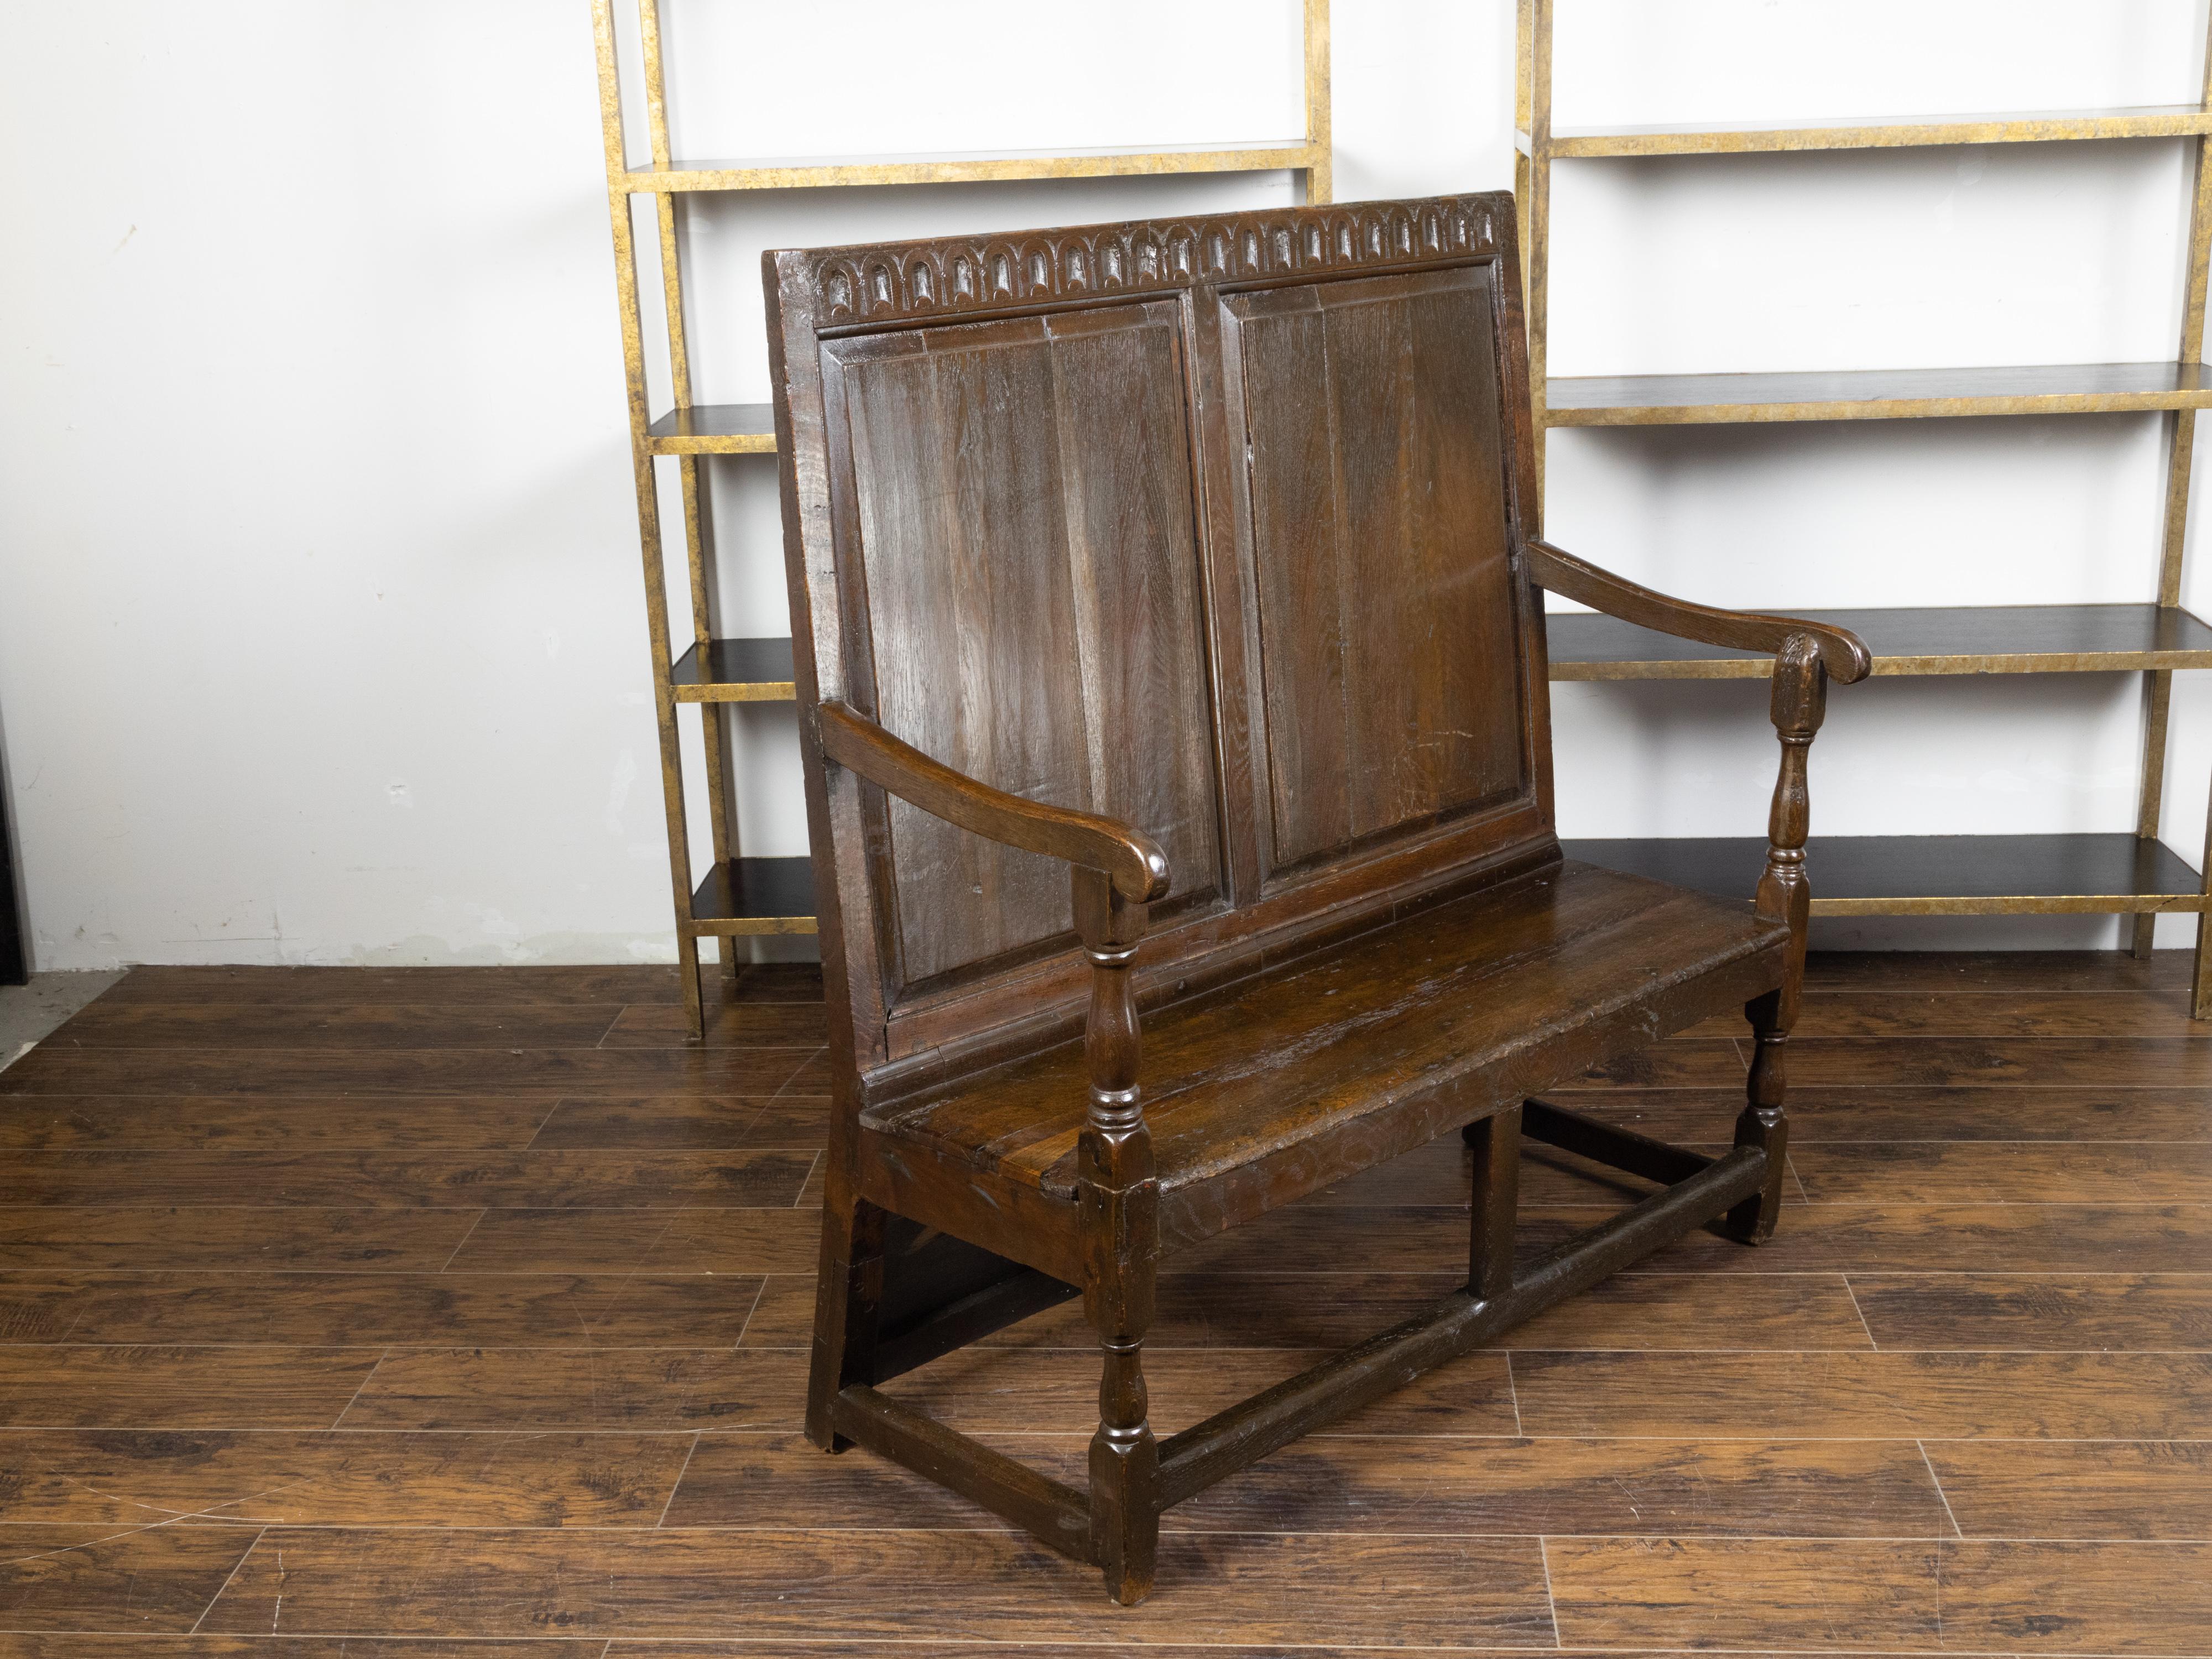 19th Century English 1870s Oak Bench with Carved Frieze, Scrolling Arms and Turned Legs